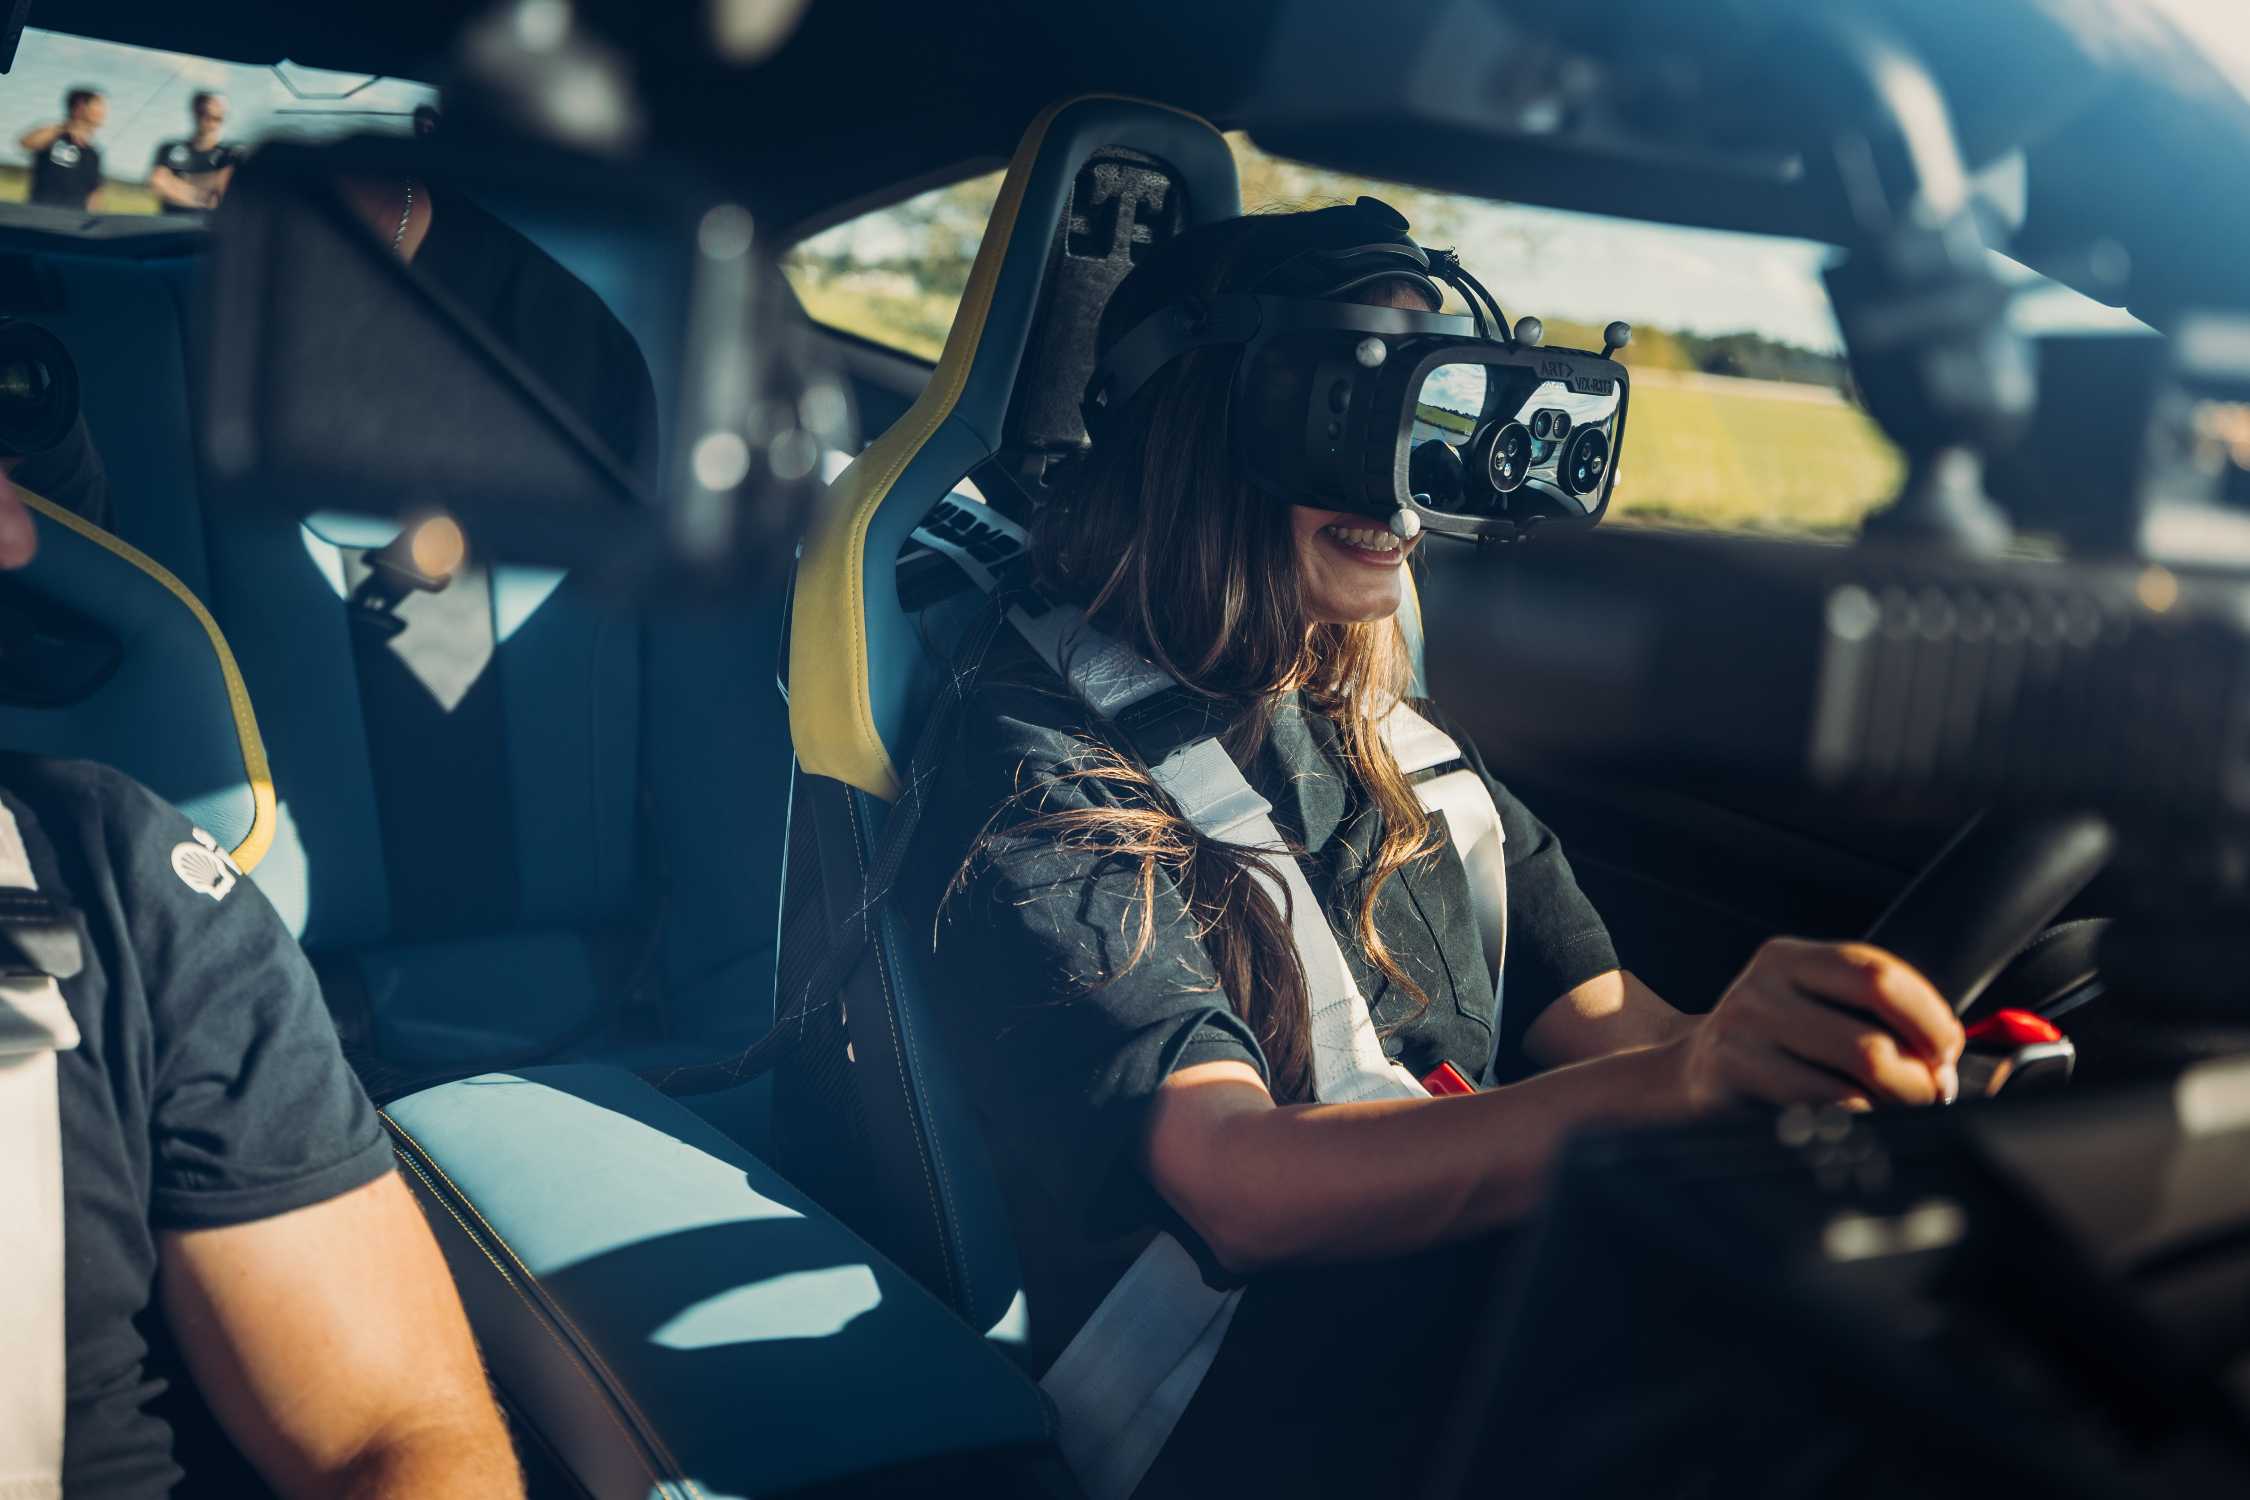 The BMW M Driving Experience introduces ground-breaking BMW M Mixed Reality technology as an exclusive offer for customers.